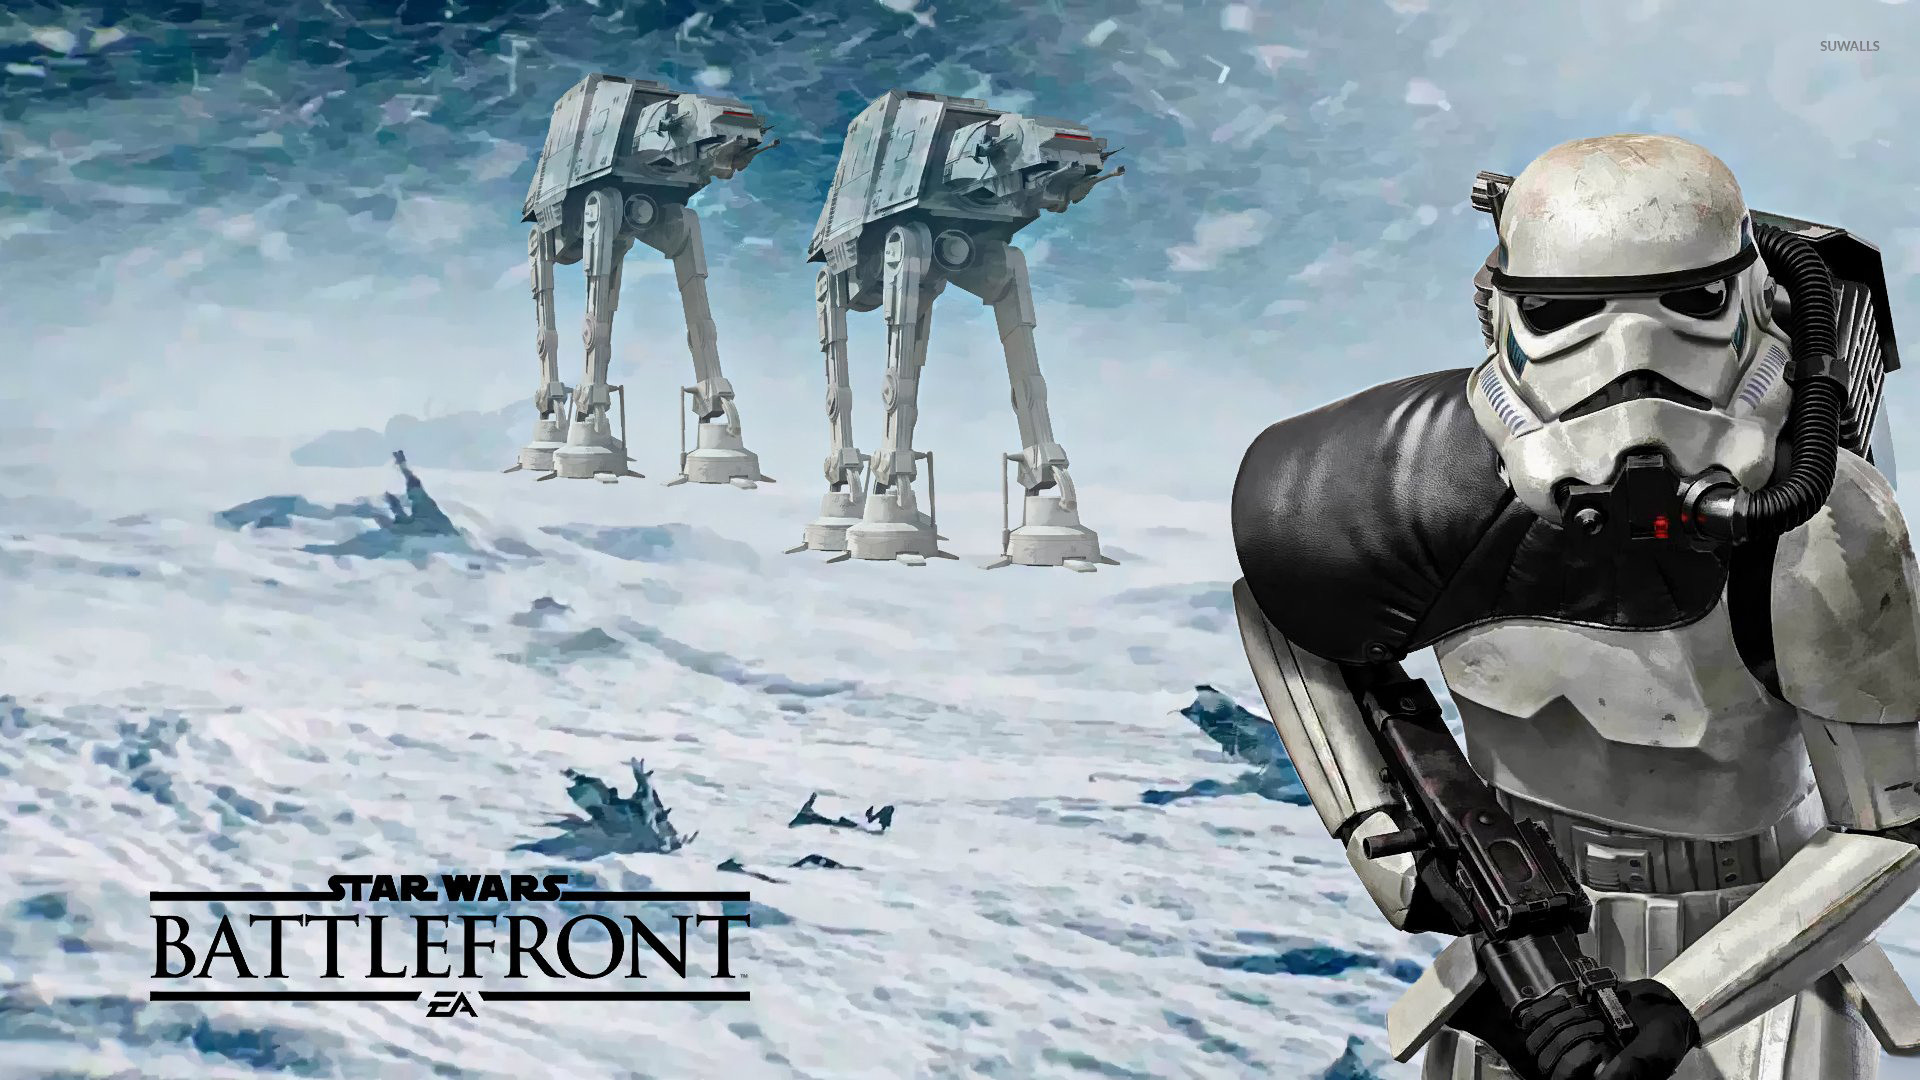 Darth Vader And Stormtroopers In Star Wars Battlefront - Star Wars Battlefront Stormtrooper Armors - HD Wallpaper 